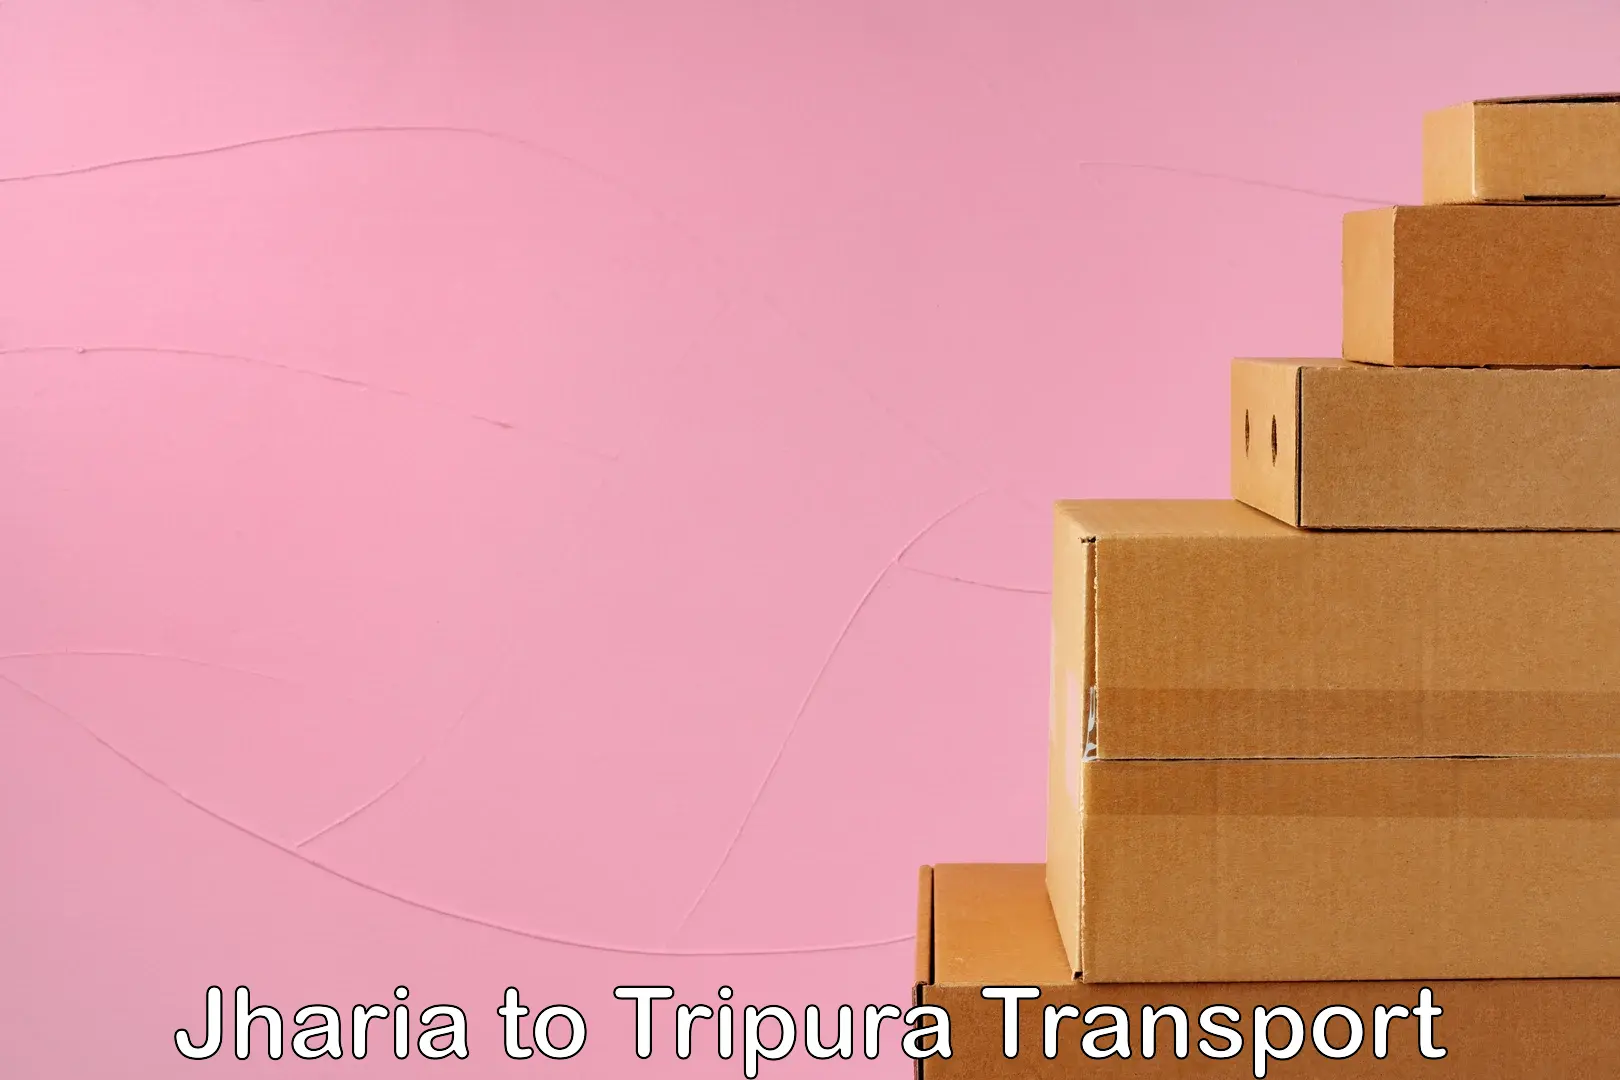 Express transport services Jharia to Tripura